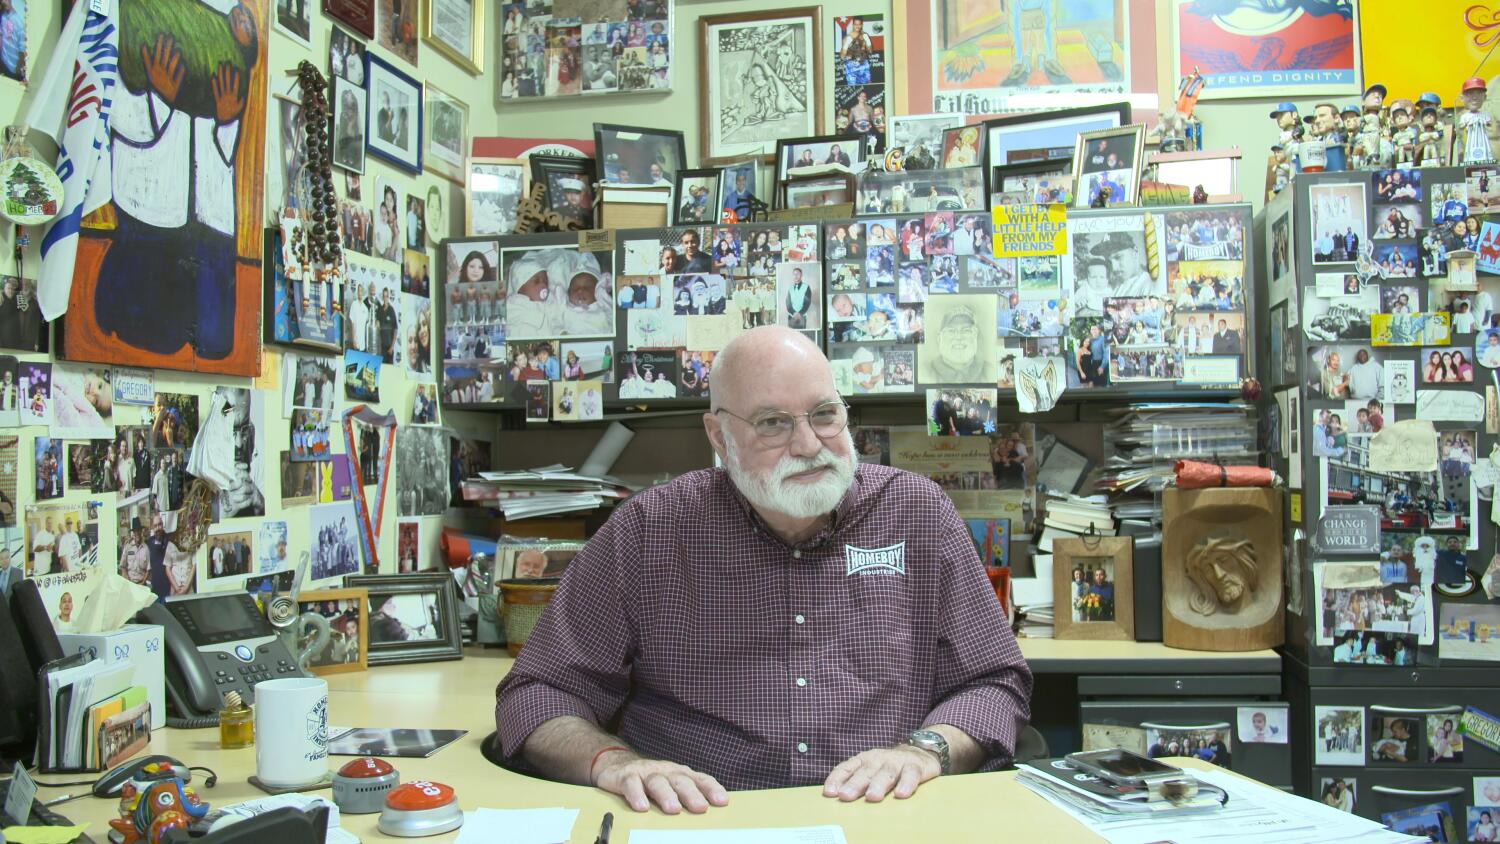 Father Greg Boyle of Homeboy Industries to receive Presidential Medal of Freedom